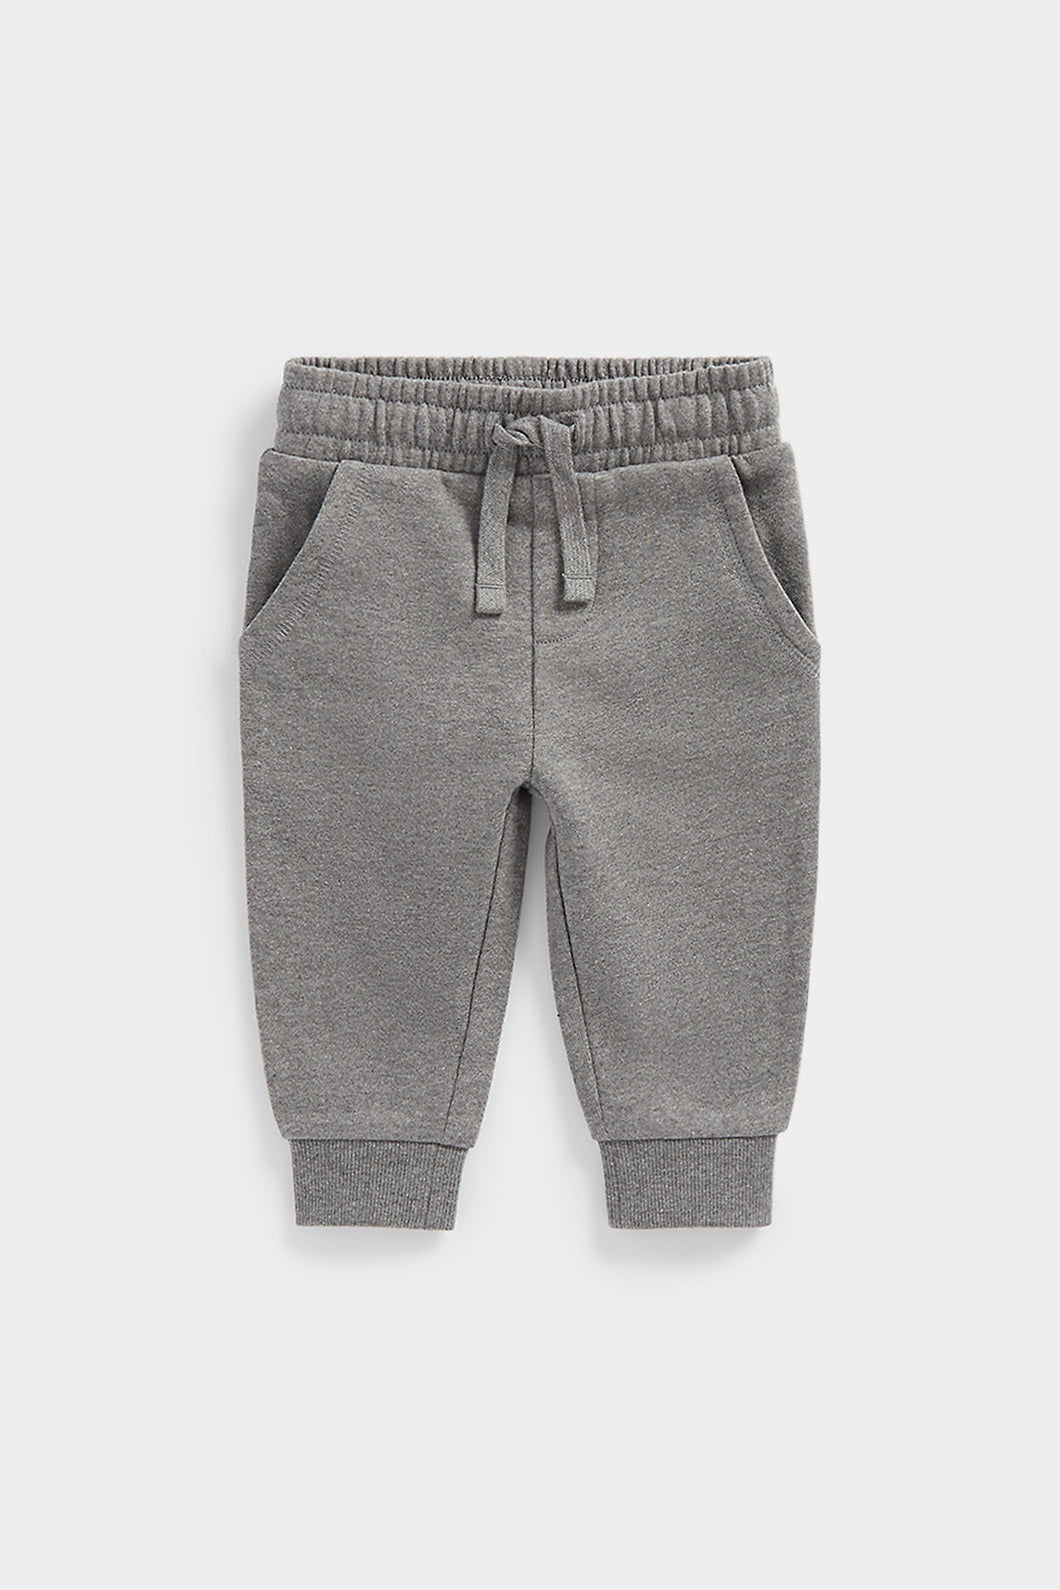 Mothercare Charcoal Joggers